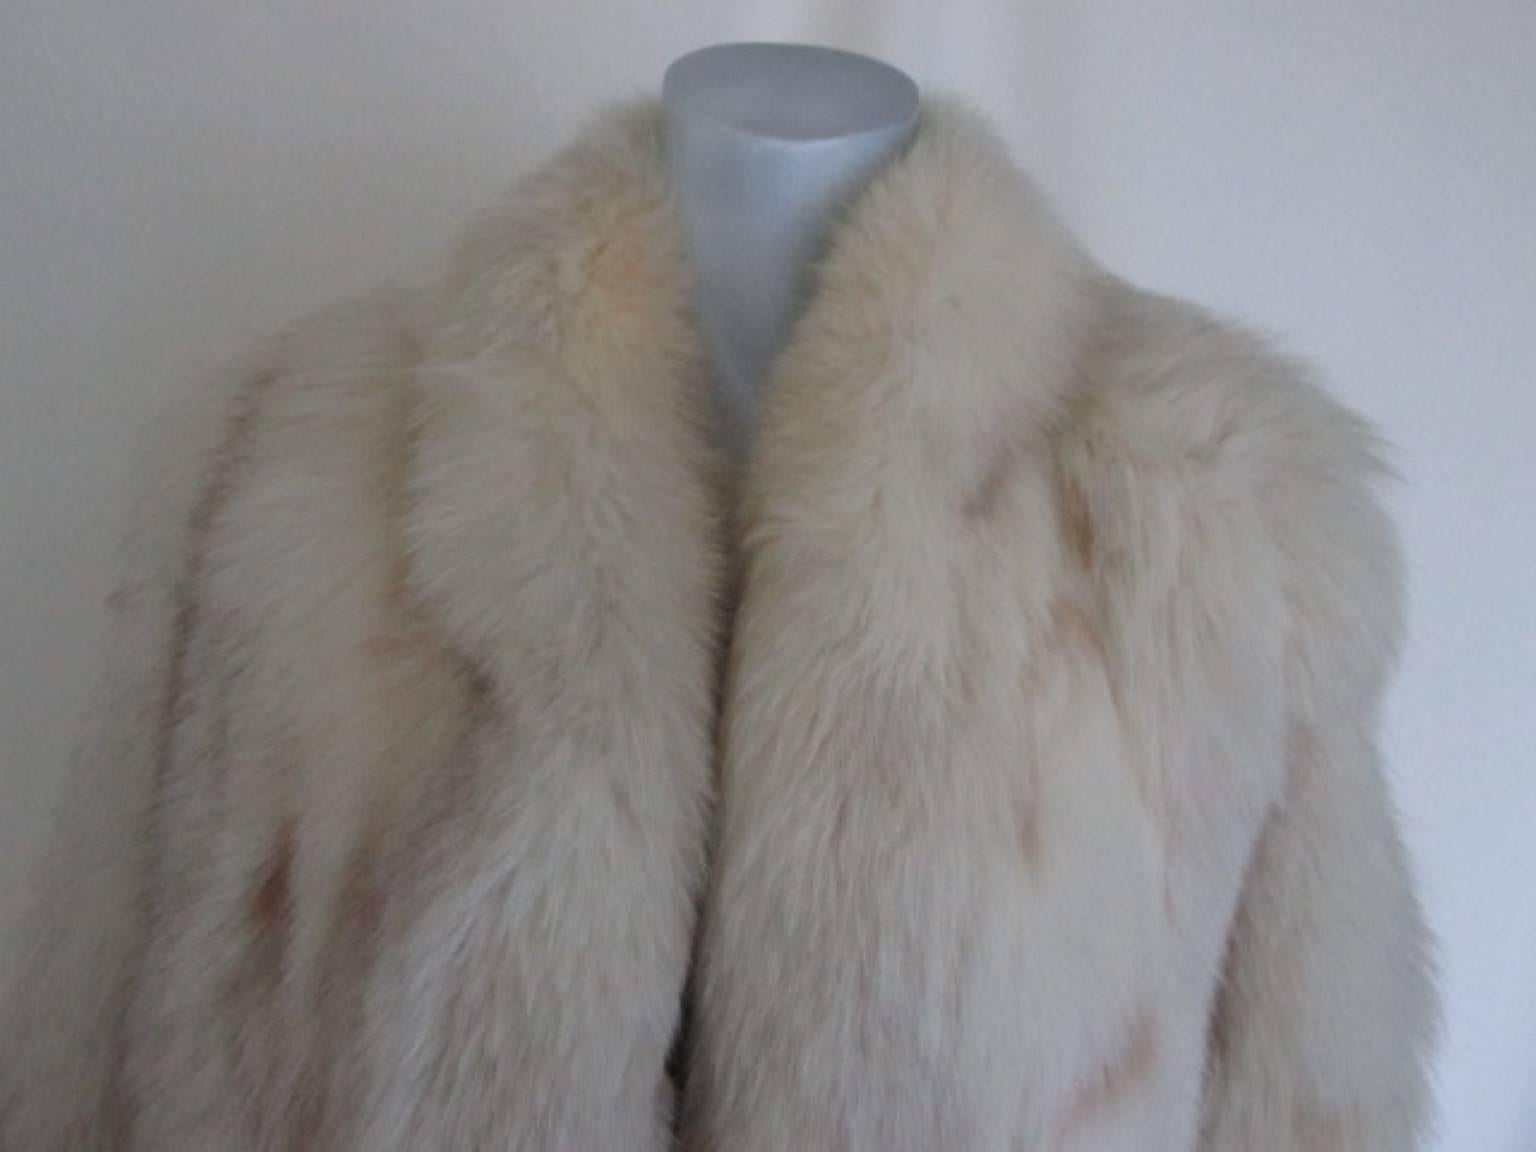 This vintage coat is made of fox fur dyed in lynx style colour.

We offer more luxury fur items, view our frontstore.

Details:
With 2 pockets, 1 inside pocket and 1 closing hook.
Appears to be small/medium, please refer to the measurements in the